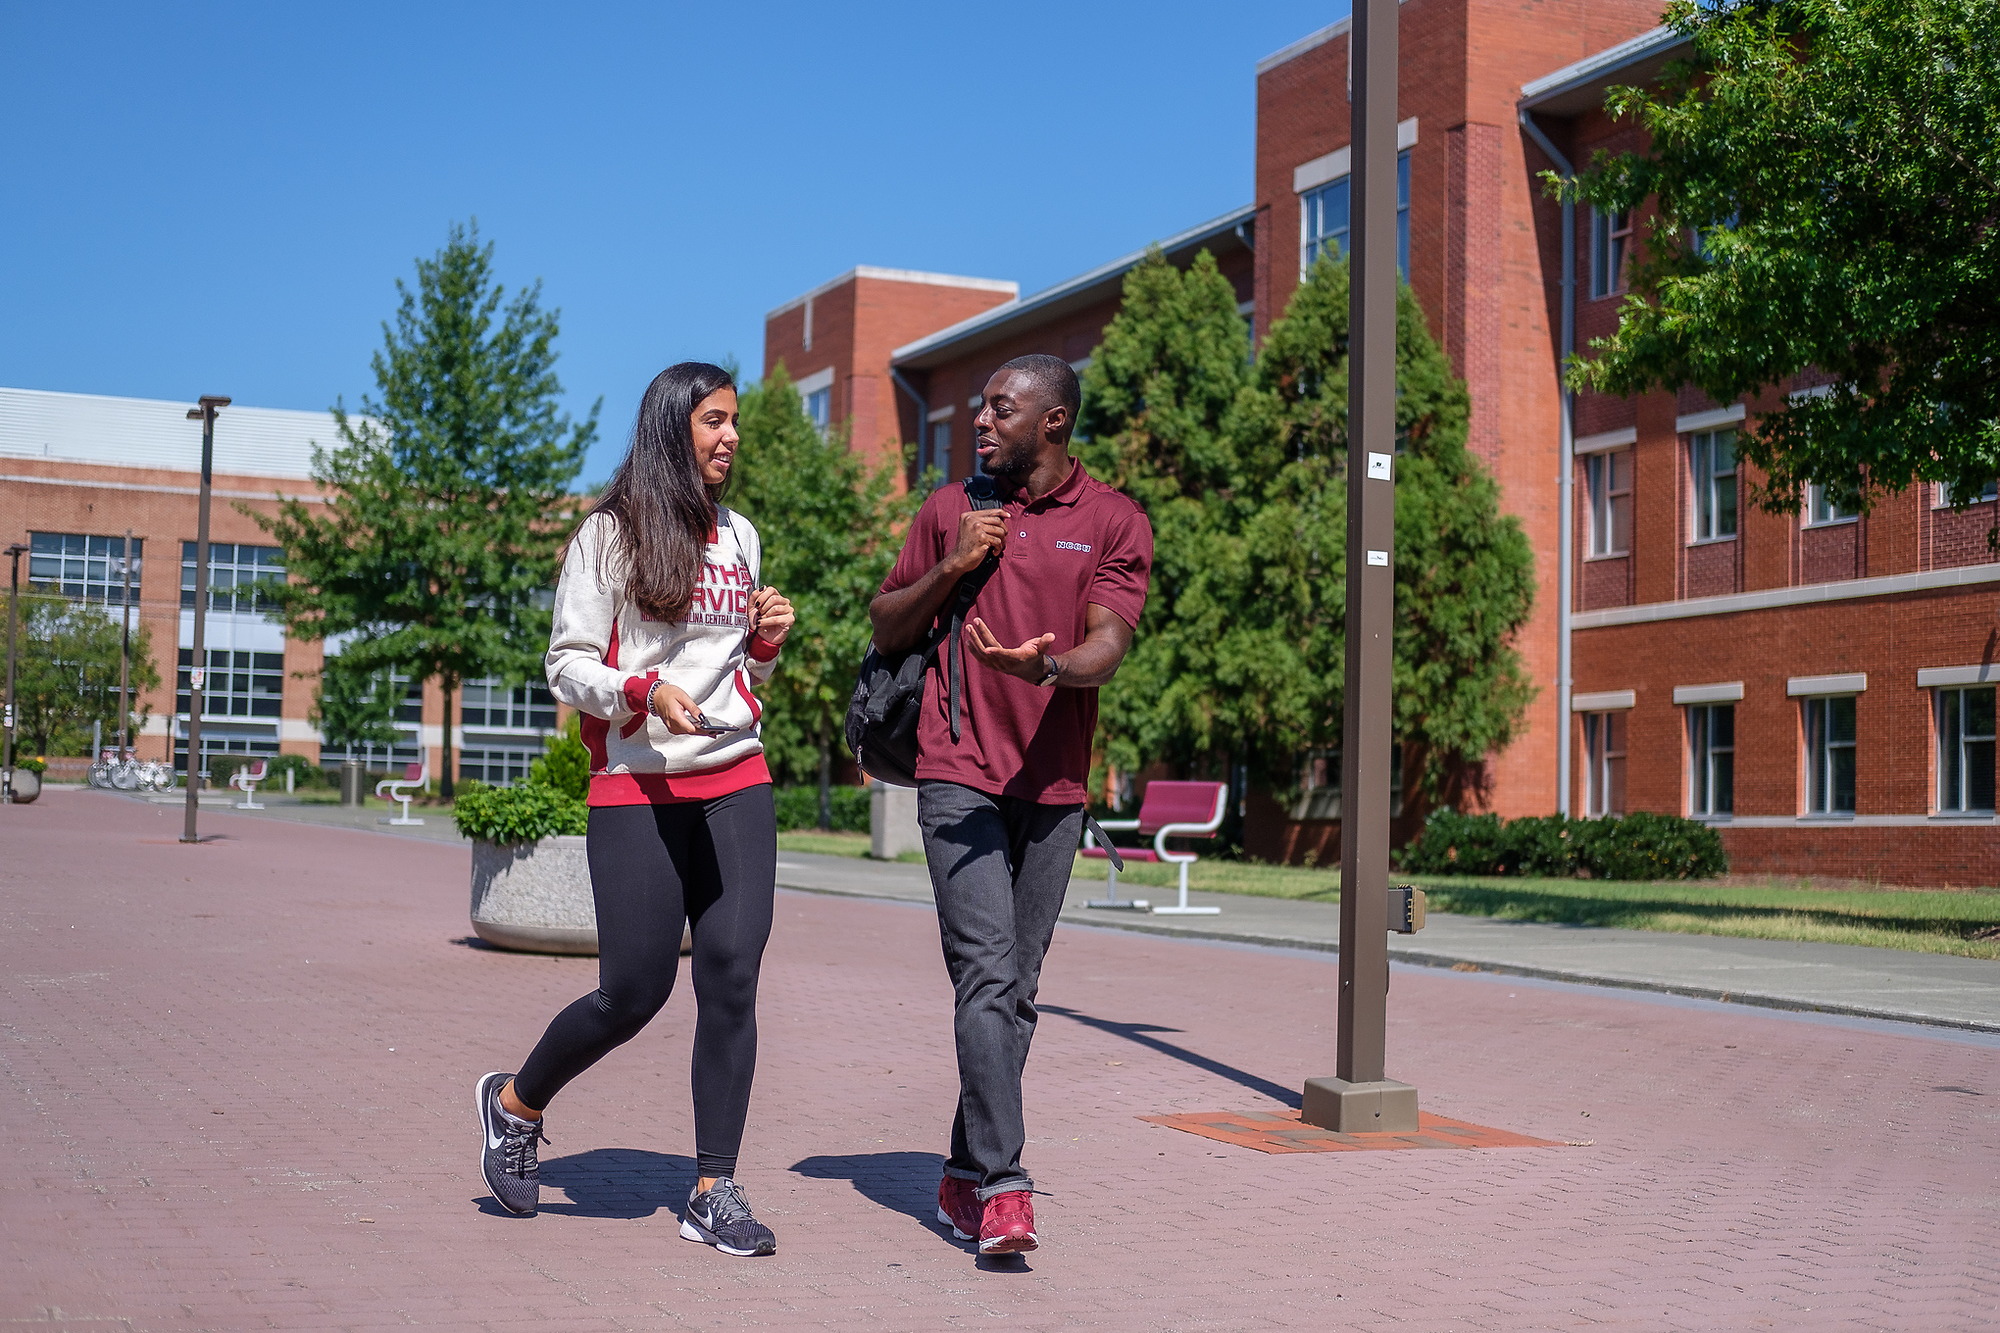 Transfered students are walking across campus